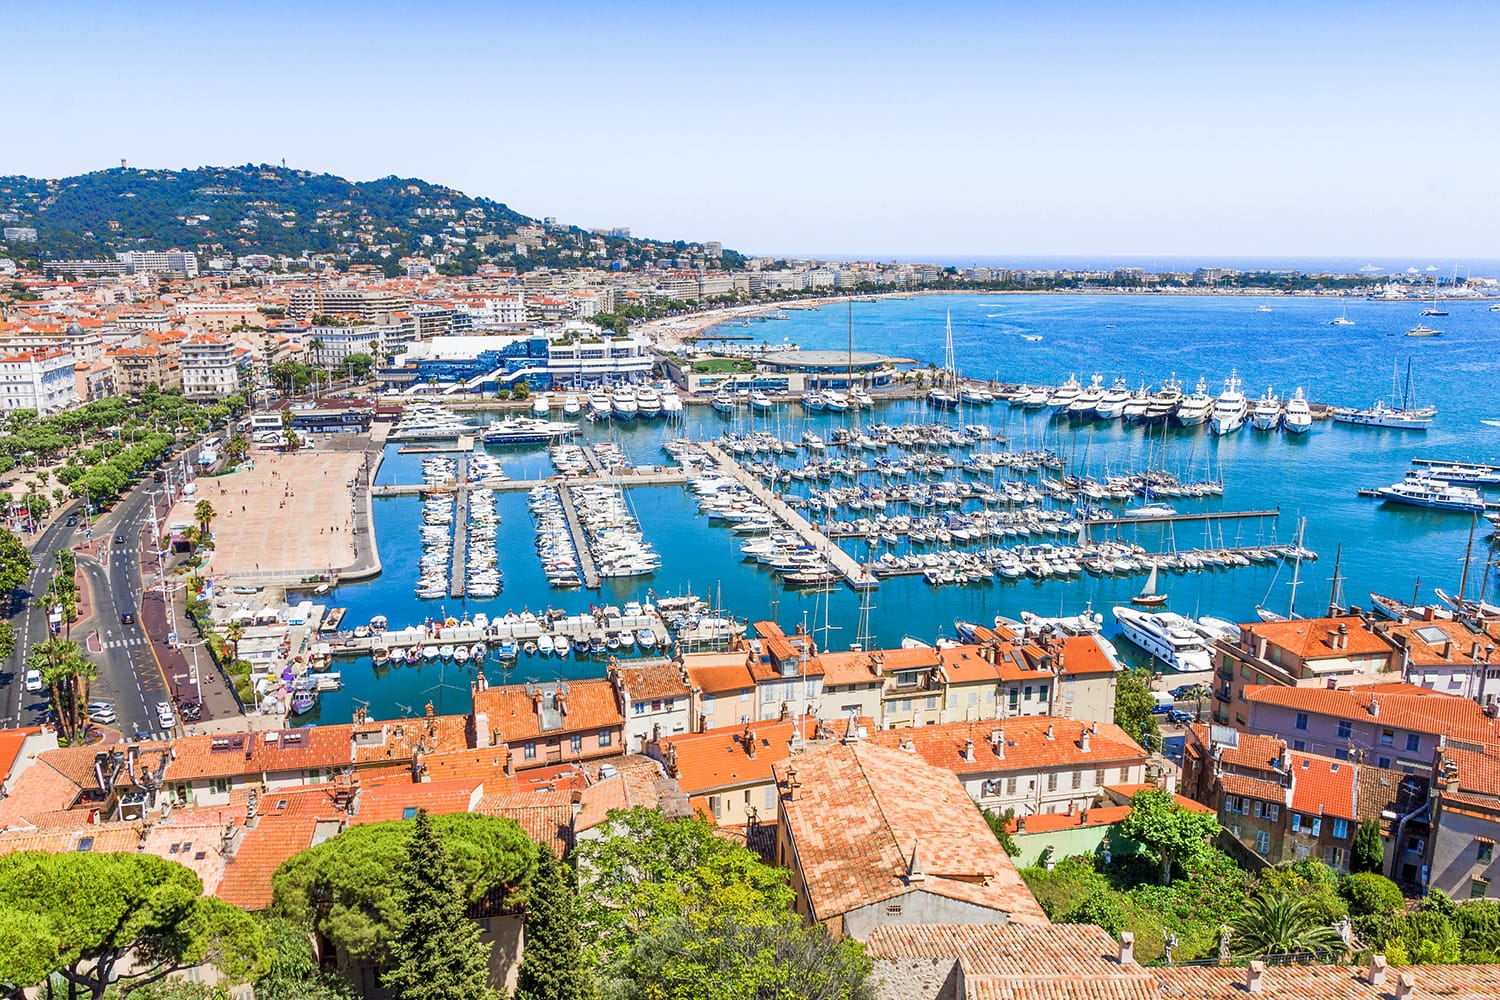 View of the harbor in Cannes, south of France